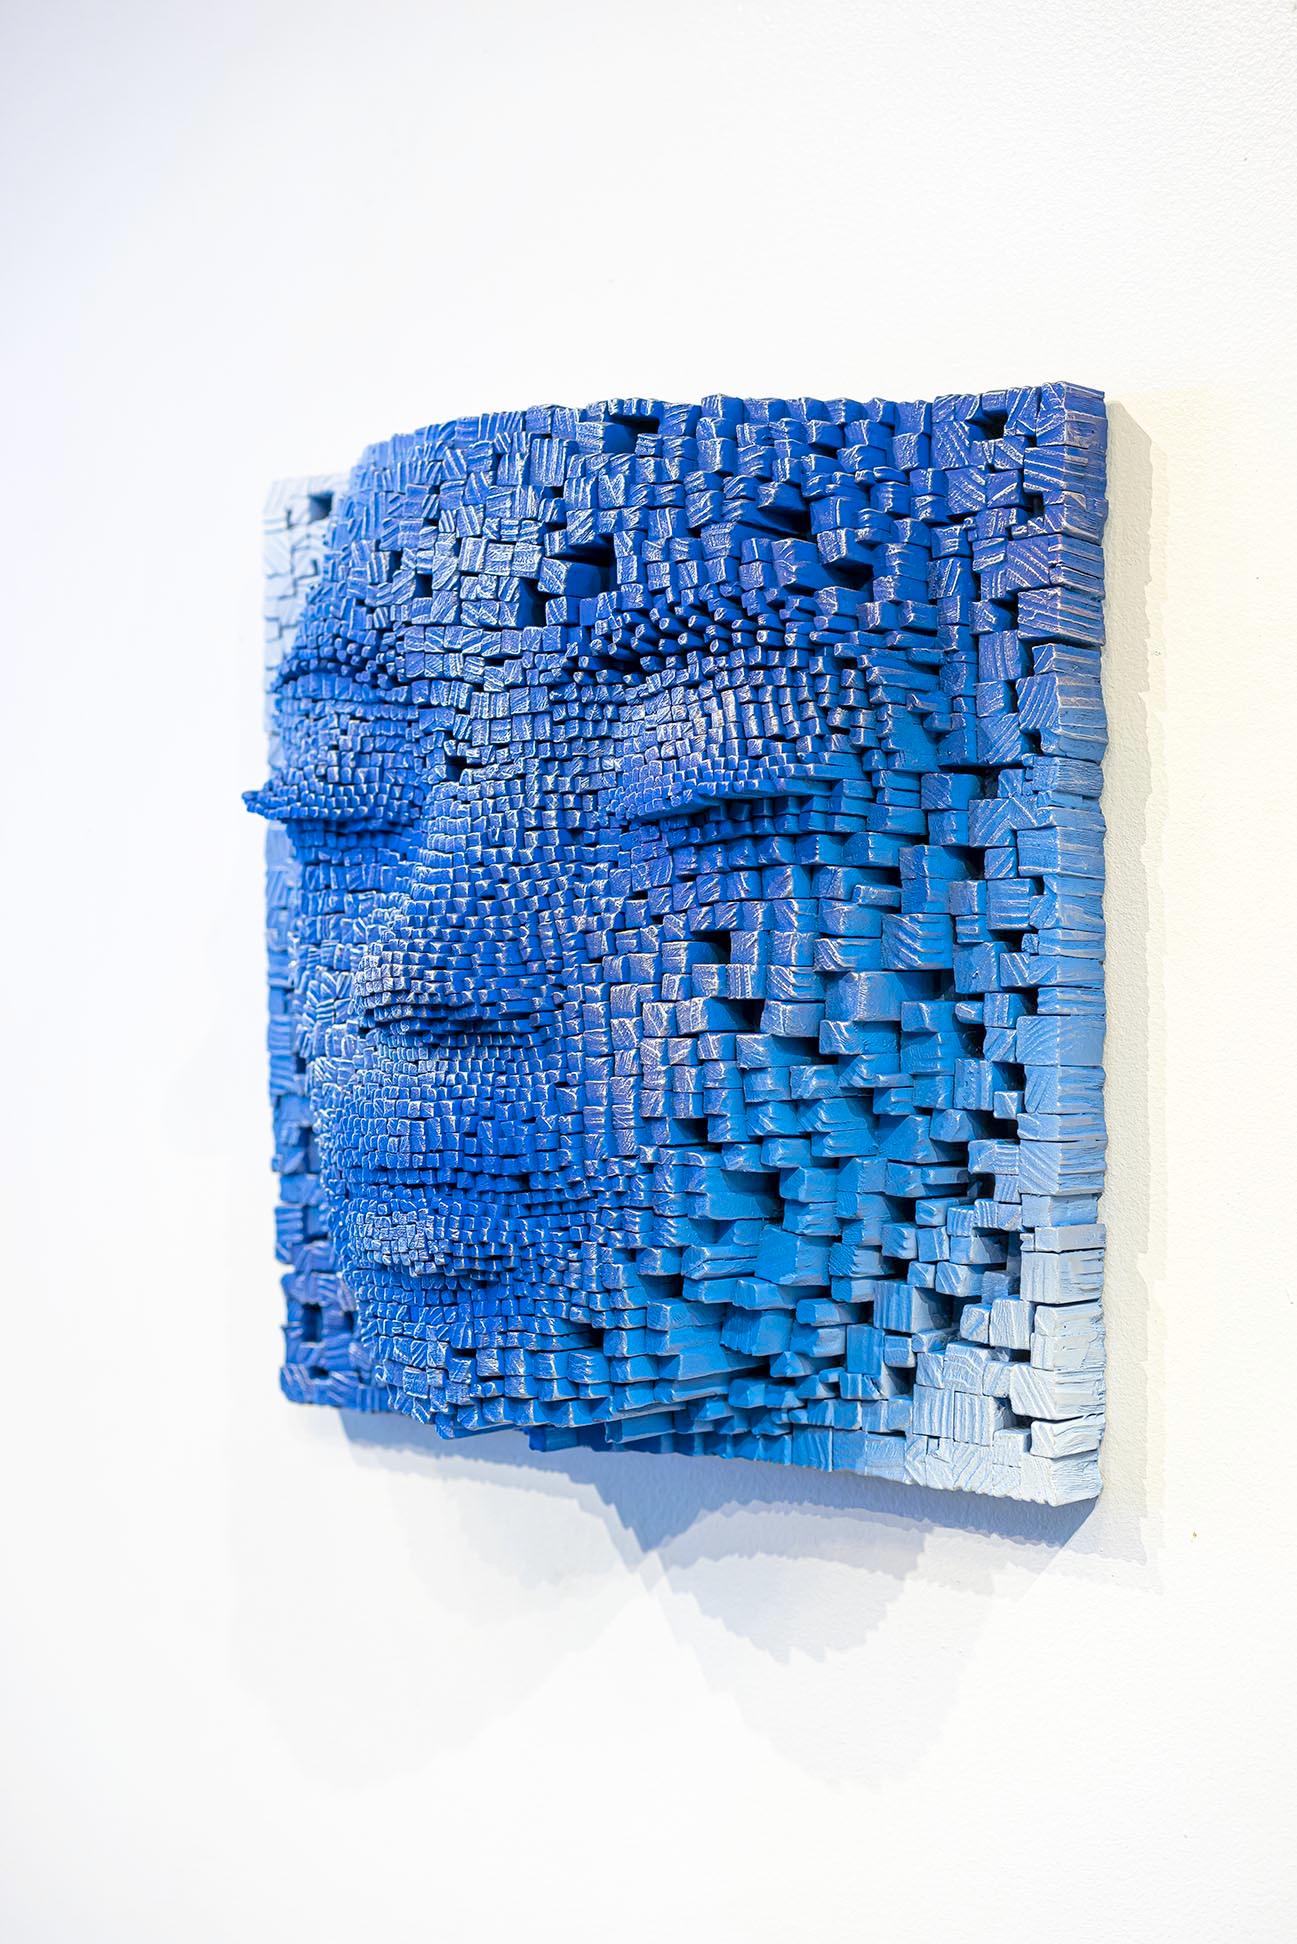 Mask #5 - Sculpture by Gil Bruvel